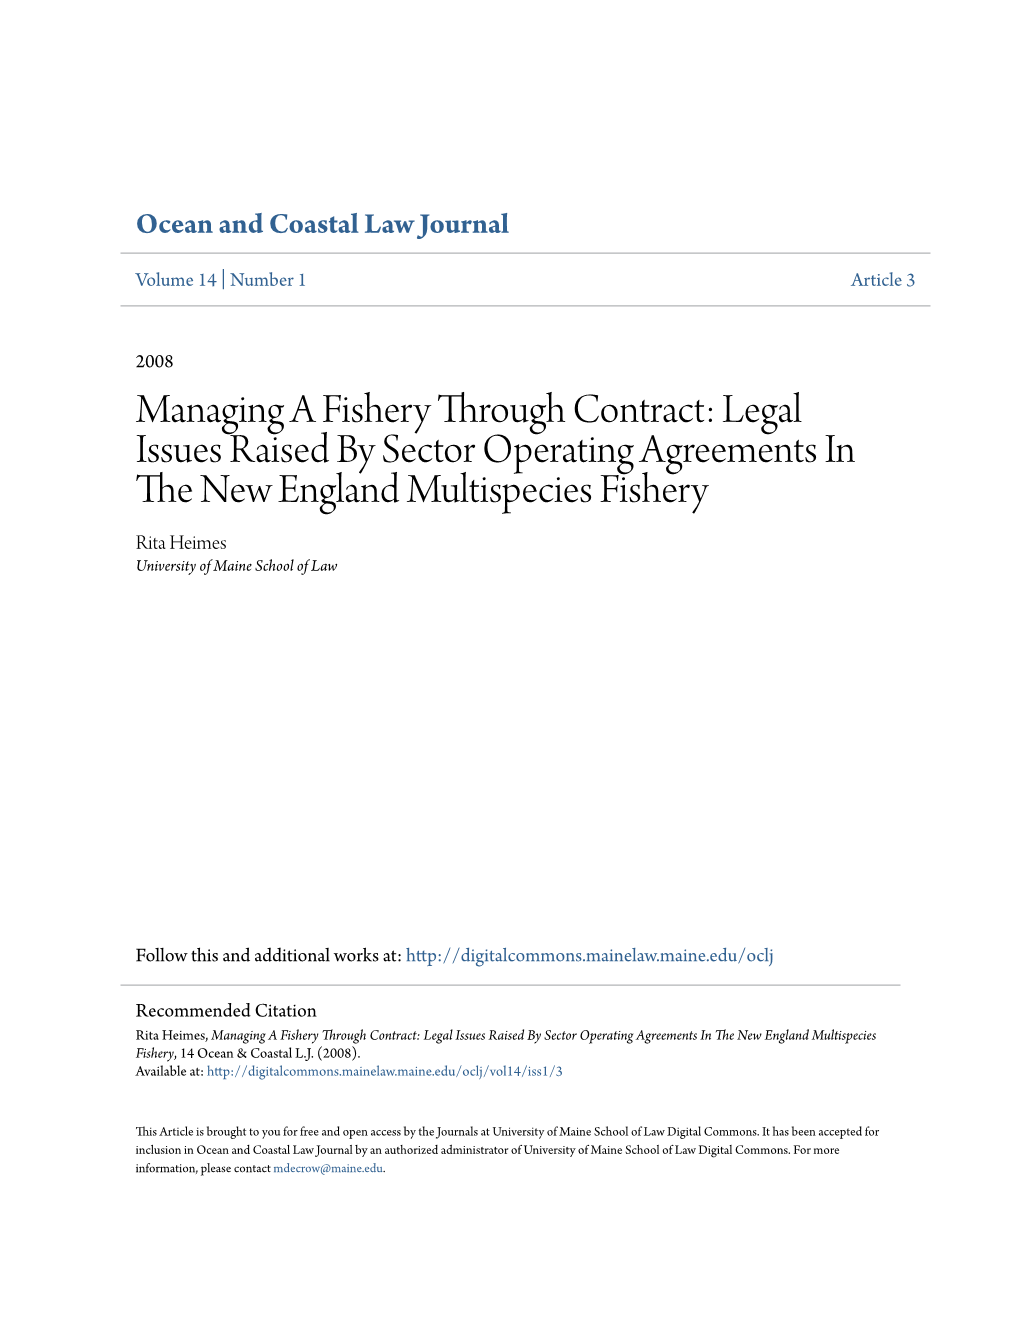 Managing a Fishery Through Contract